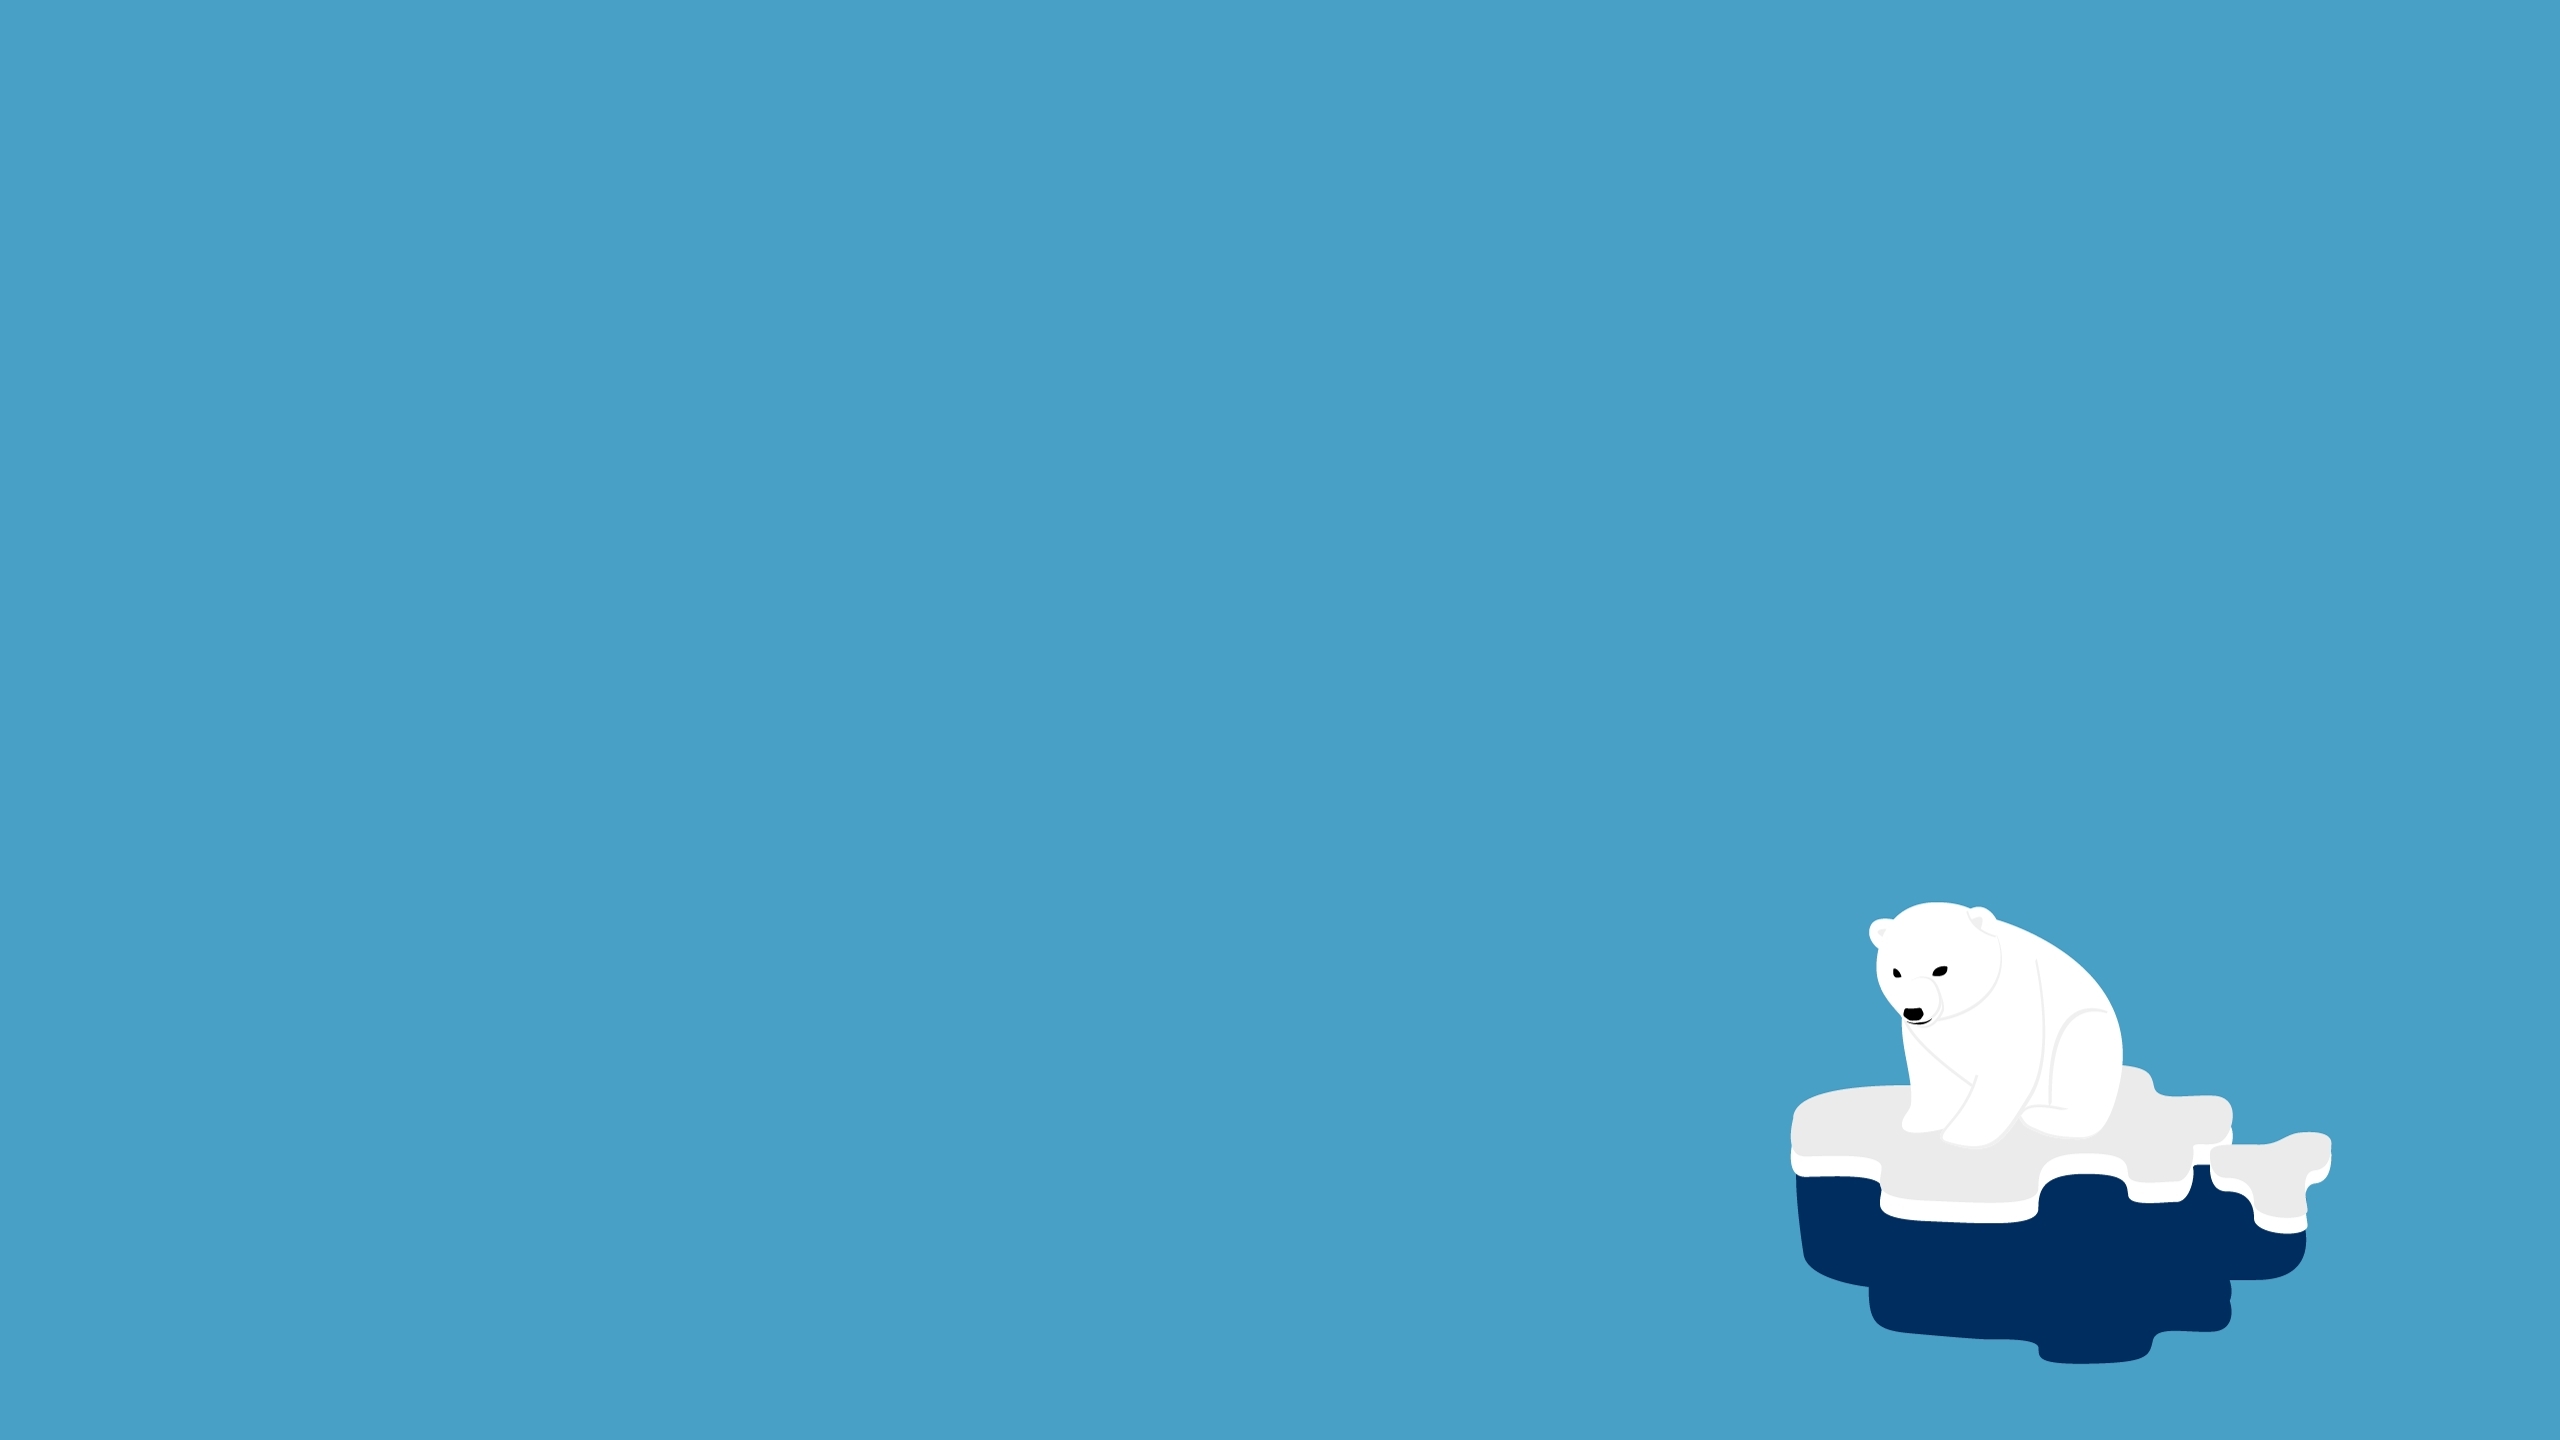 2560x1440 Polar Bear Ice Minimalism 1440p Resolution Wallpaper Hd Vector 4k Wallpapers Images Photos And Background Wallpapers Den